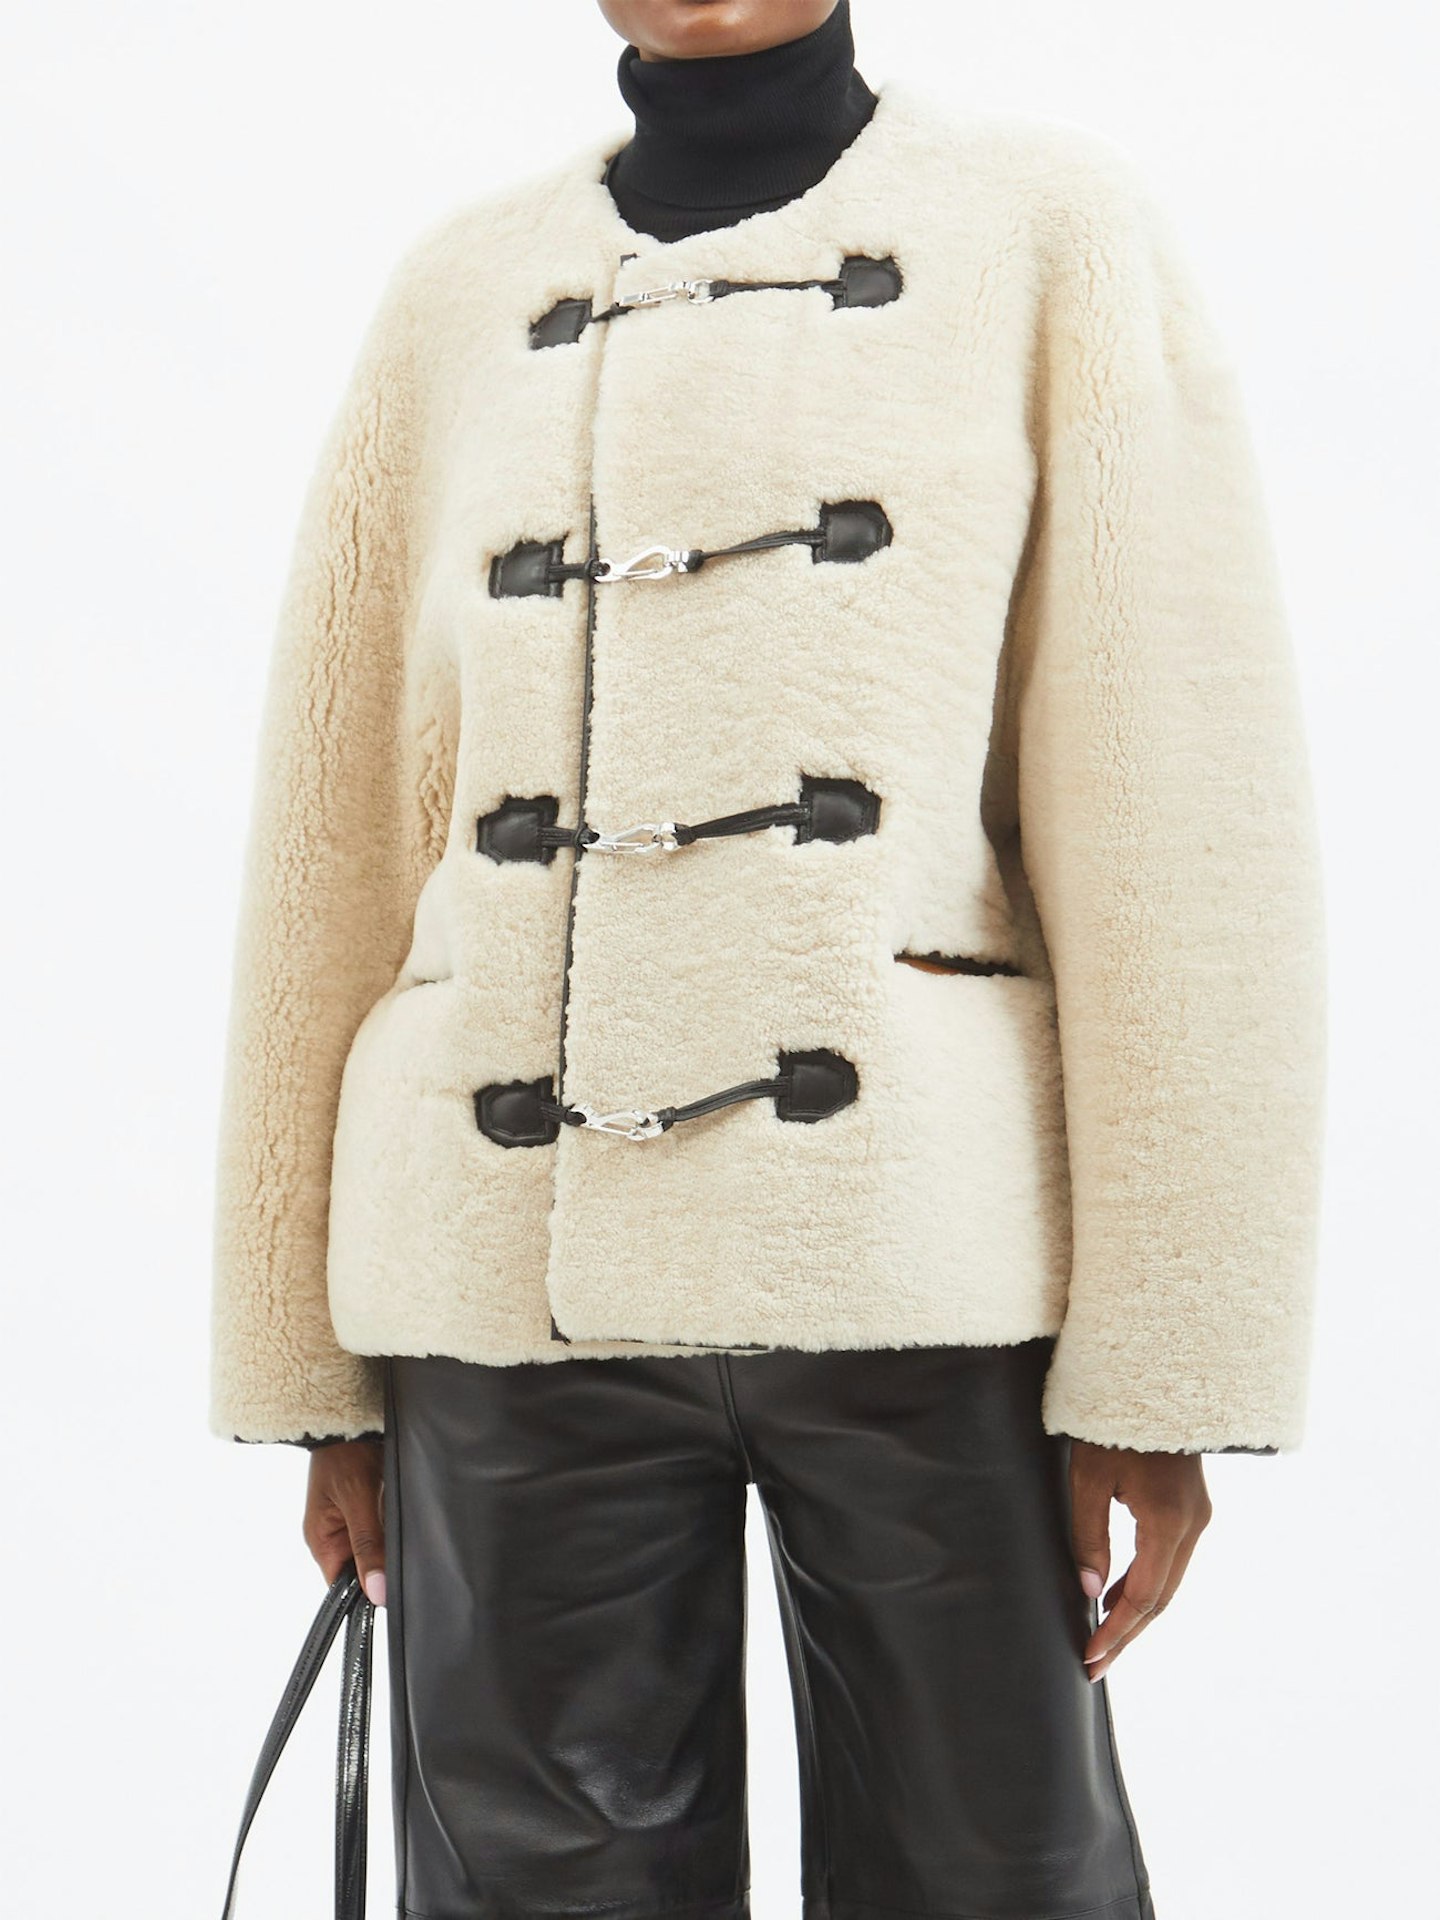 Toteme, Clasp-front leather-trim shearling jacket, £1,960